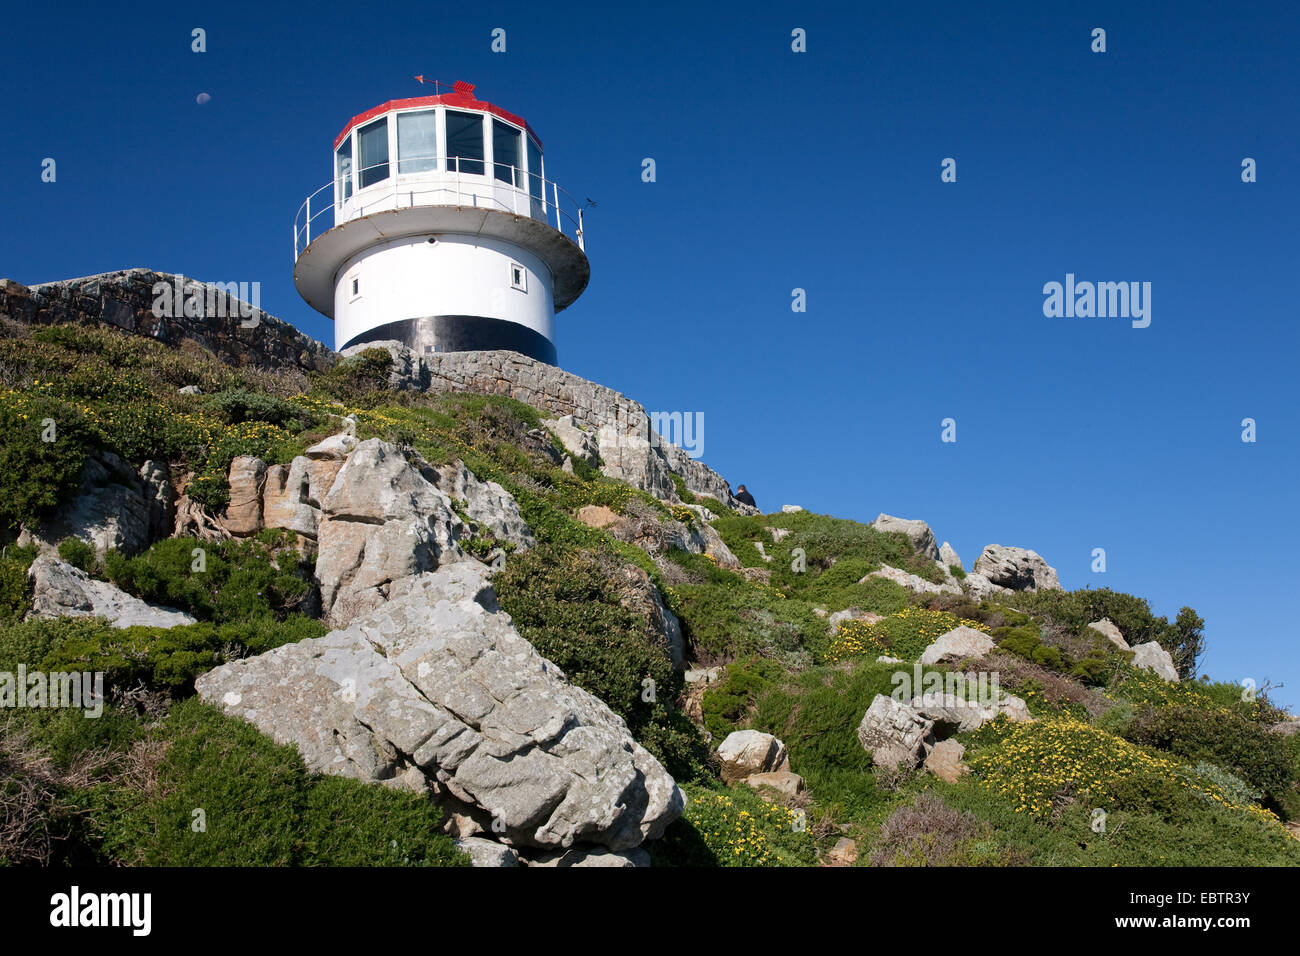 lighthouse at Cape Point, South Africa, Western Cape, Cape of Good Hope National Park, Capetown Stock Photo